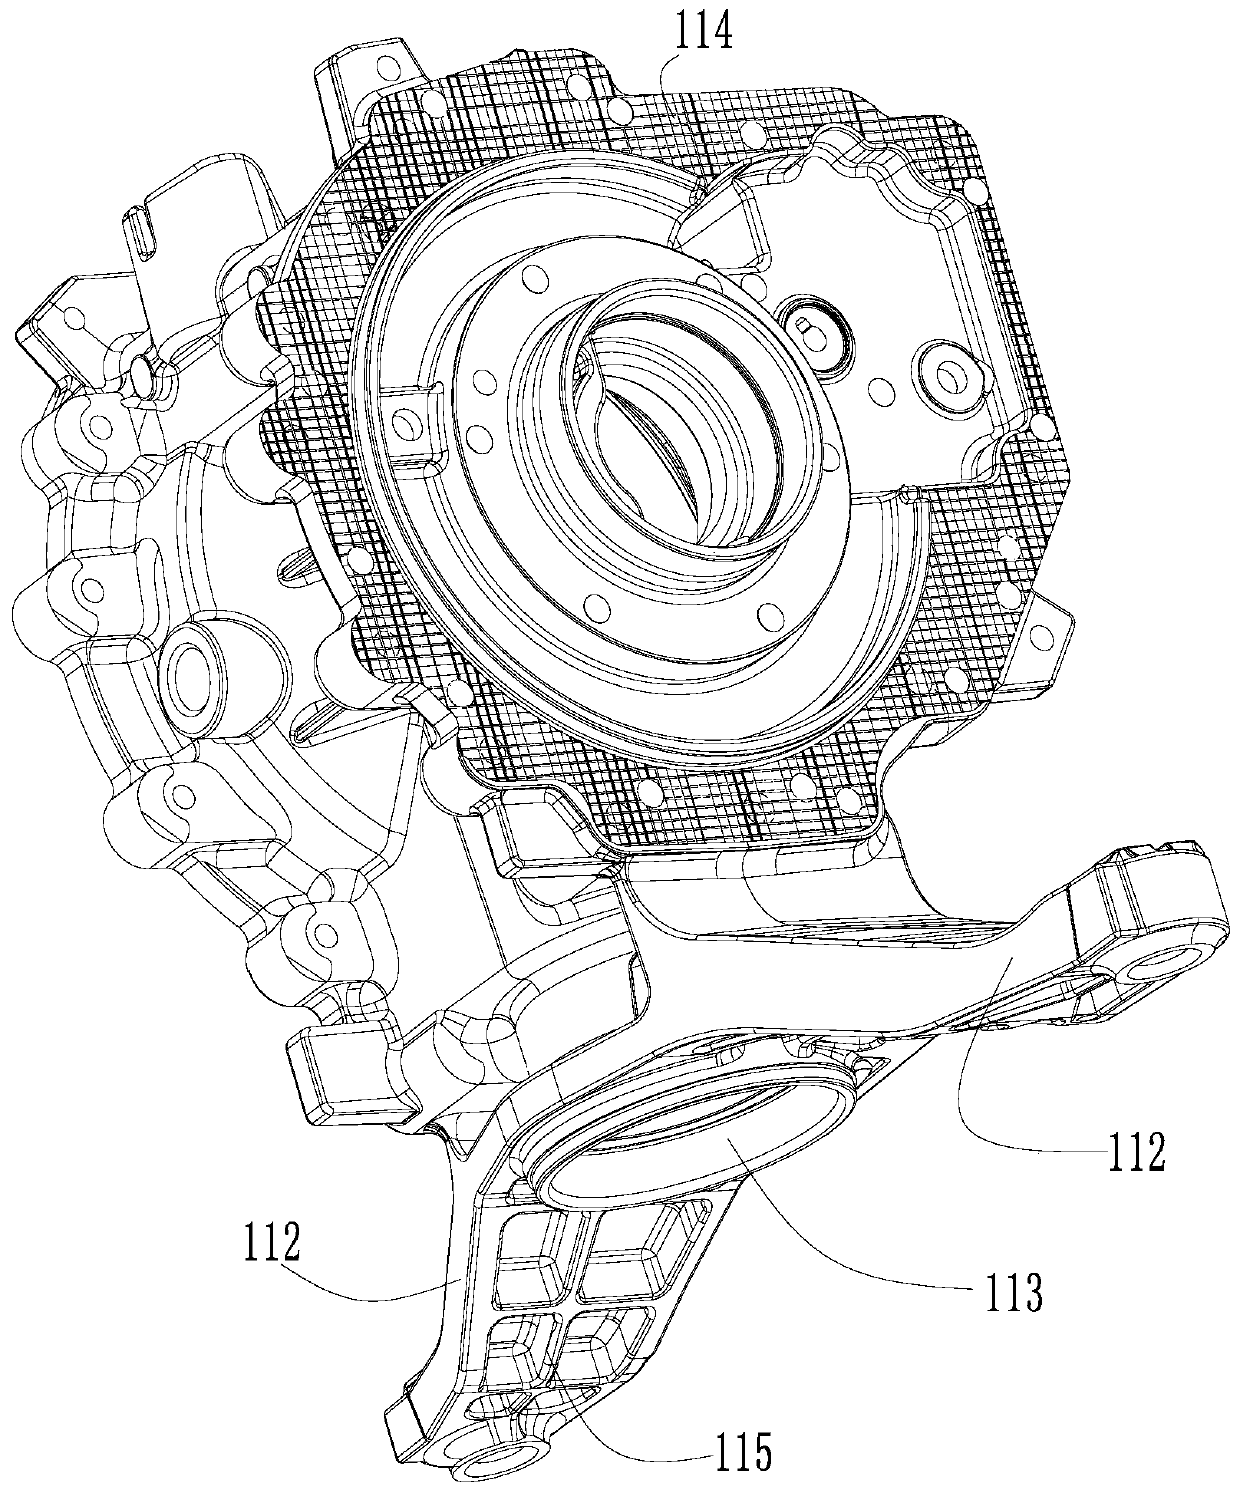 Automobile bracket with embedding part and die-casting die for forming automobile bracket